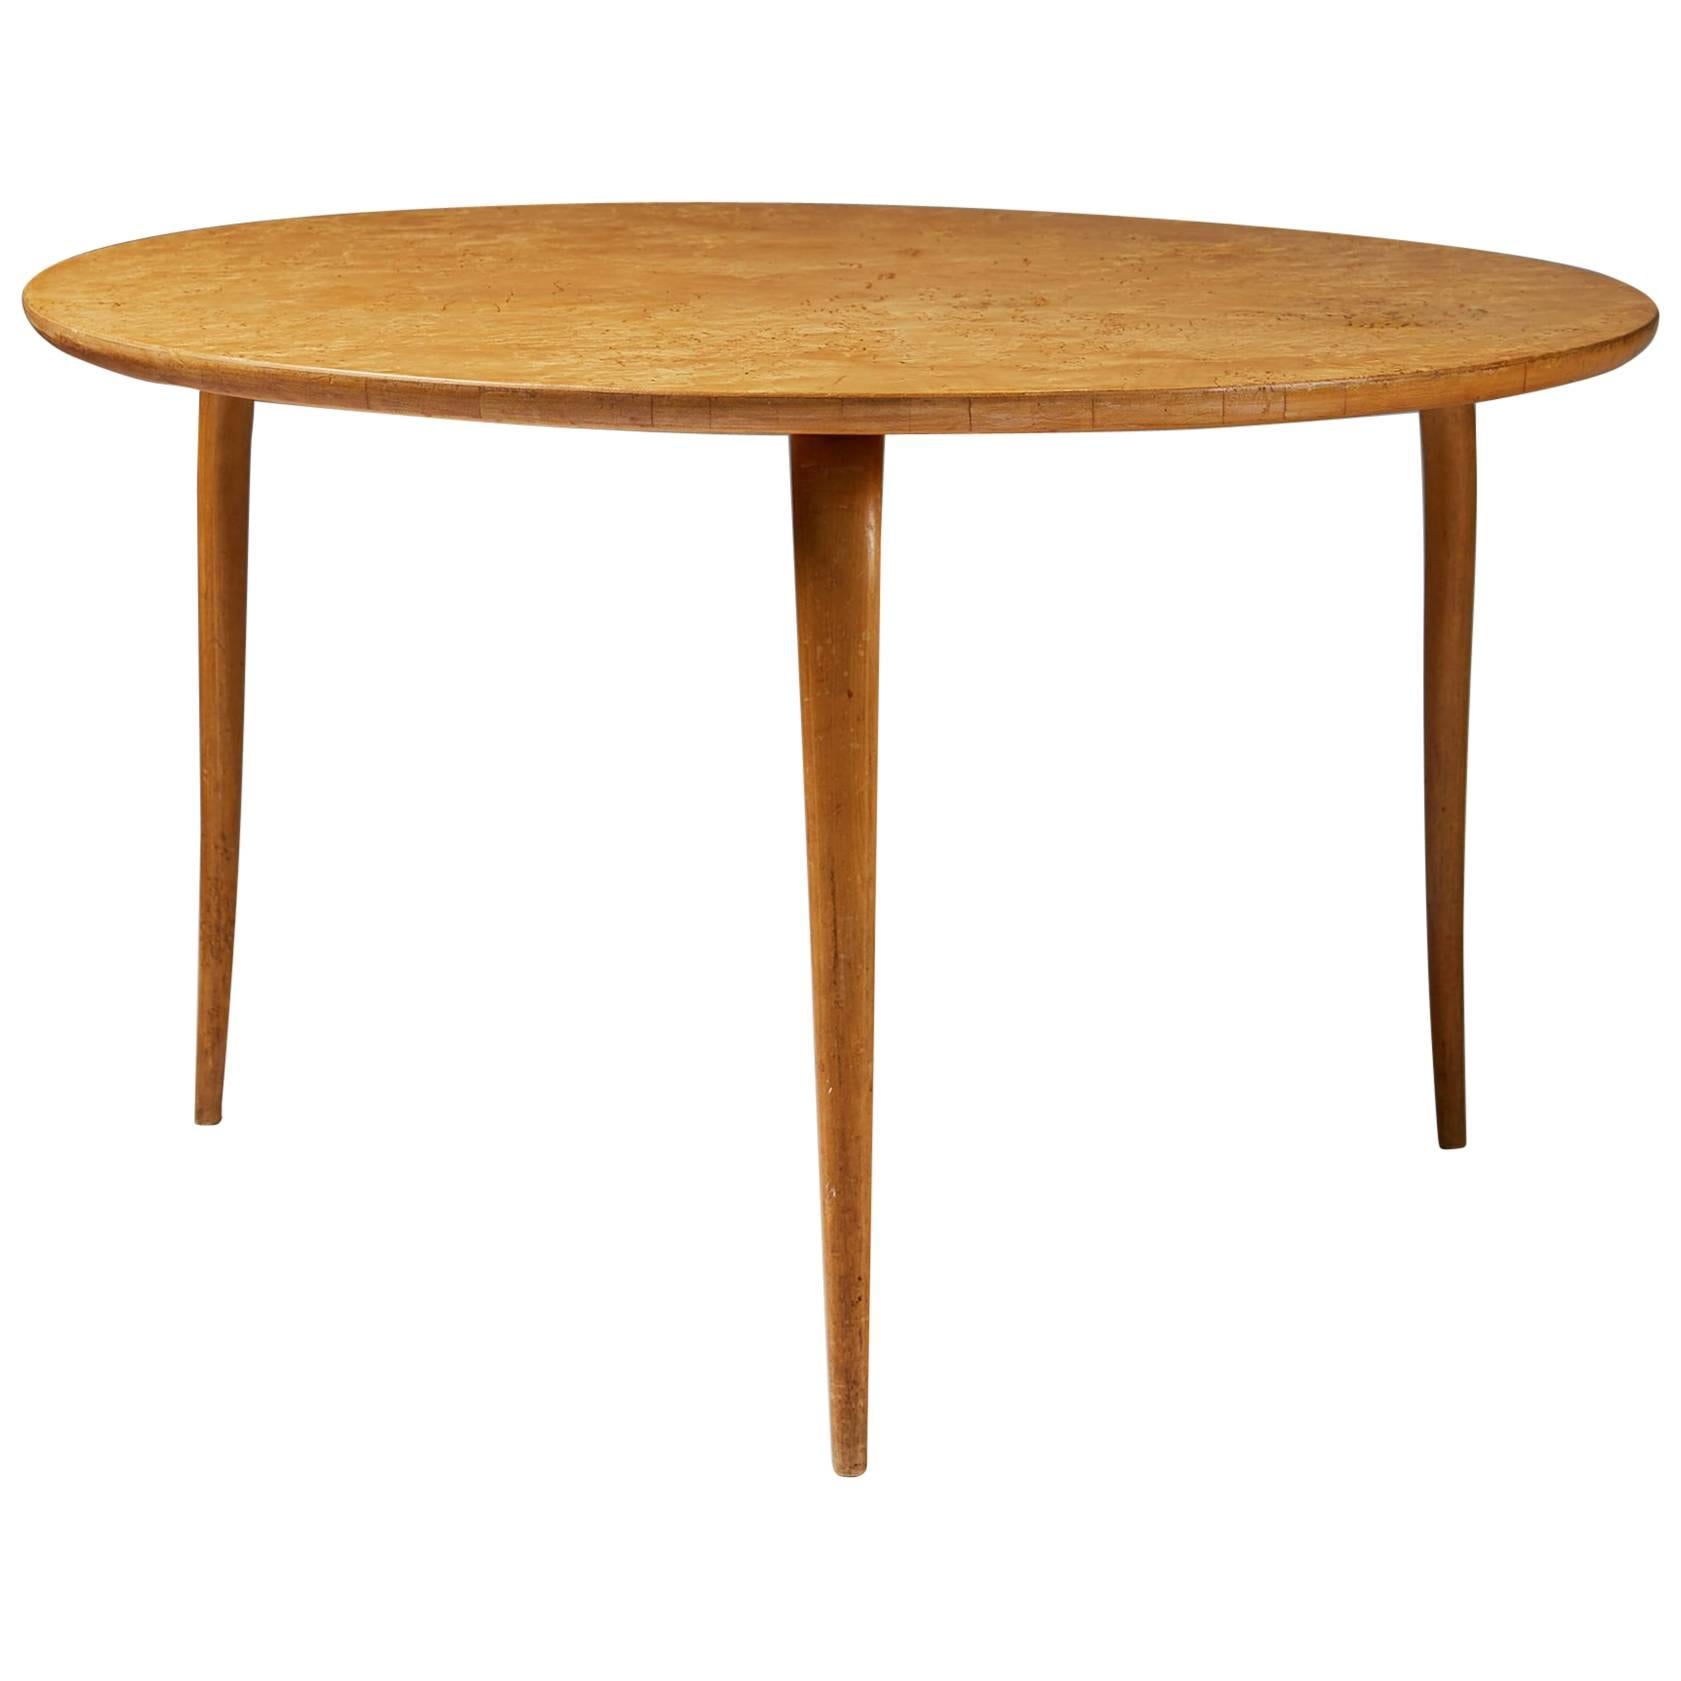 Occasional Table Annika Designed by Bruno Mathsson, Sweden, 1936